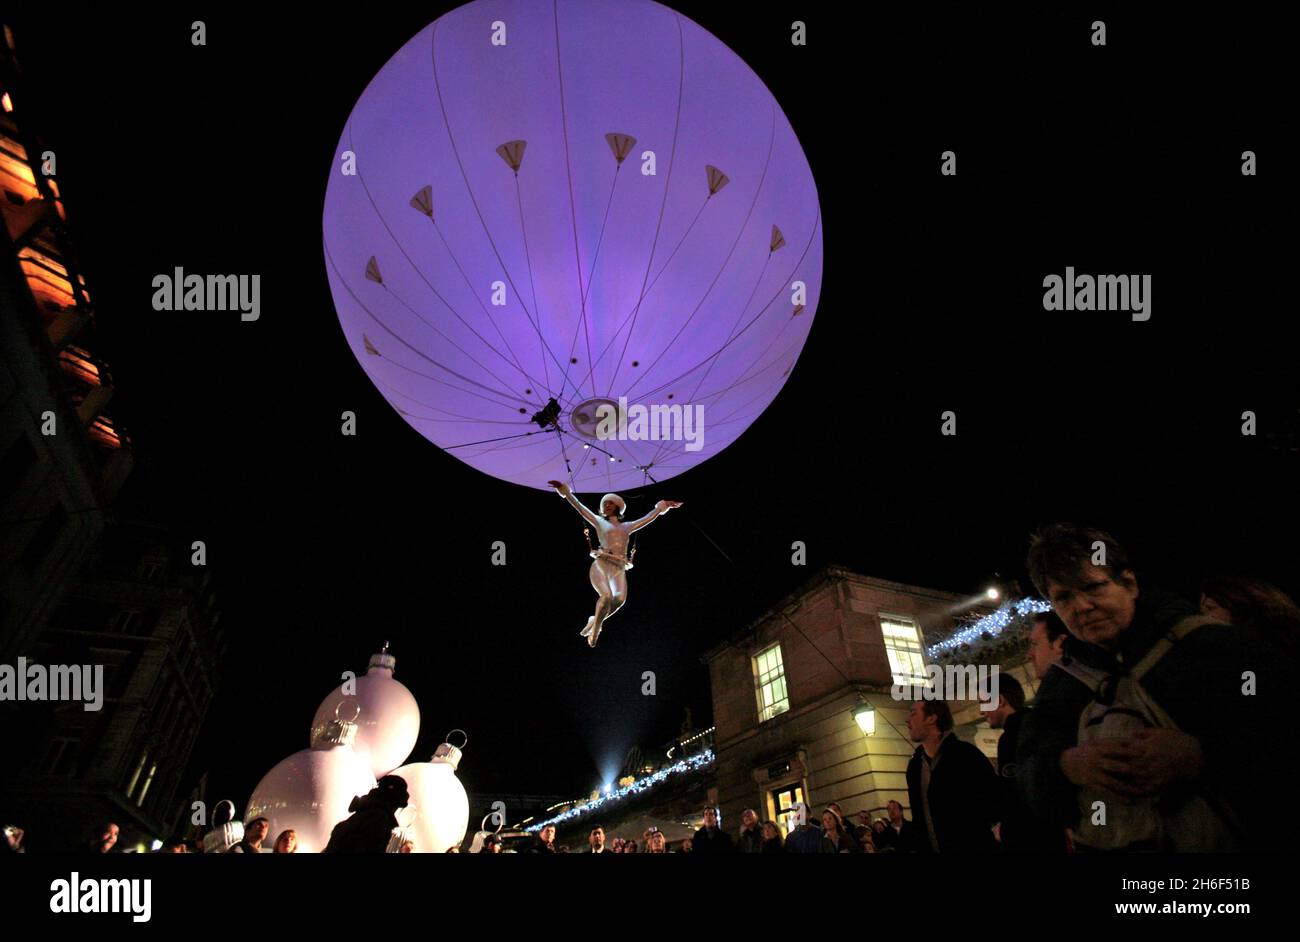 Heliosphere performing at London's Covent Garden as part of it's Christmas Deluxe season of events. Stock Photo